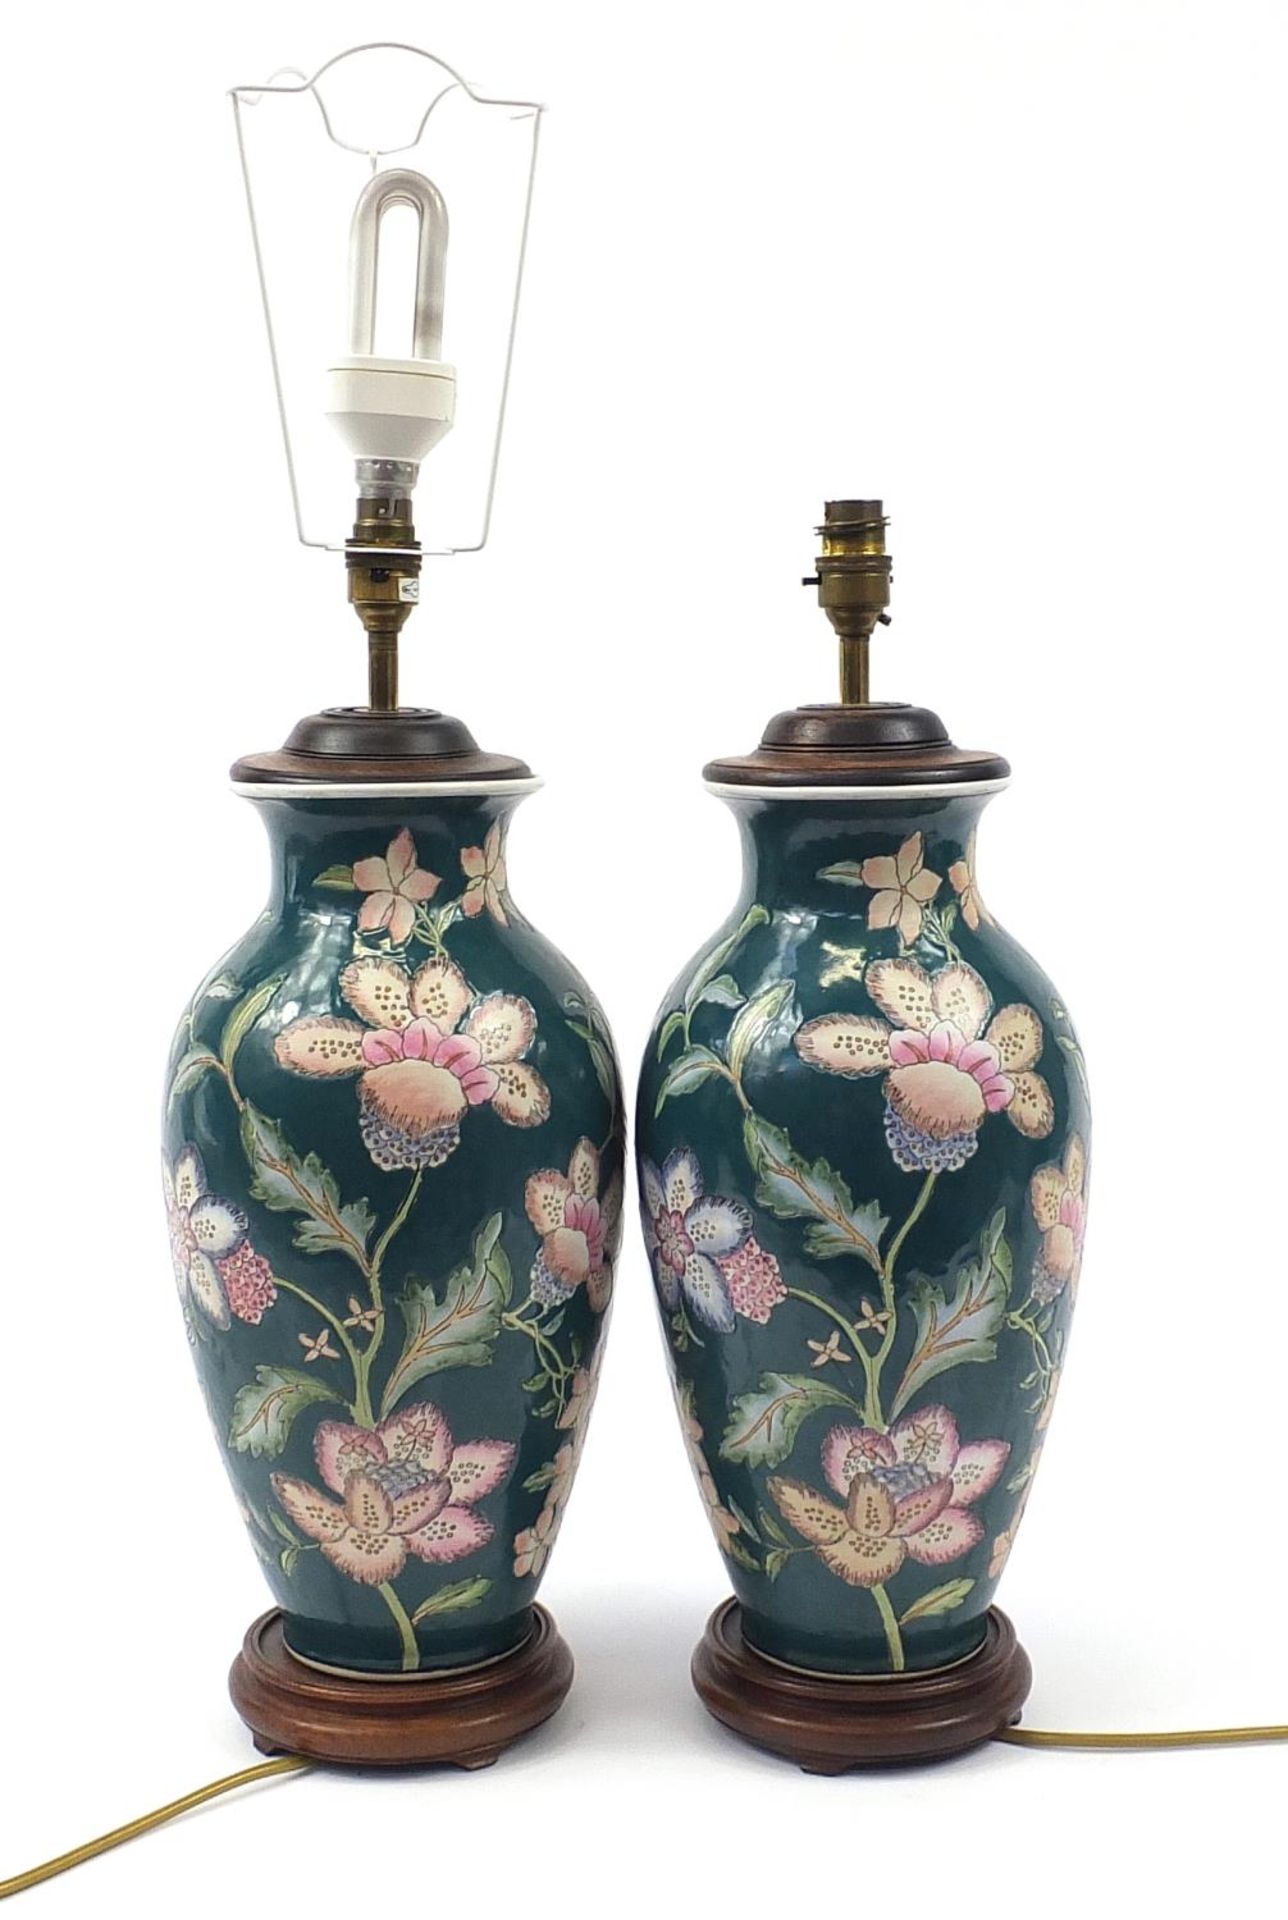 Pair of Chinese porcelain vase table lamps hand painted with flowers, each 53cm high - Image 2 of 3